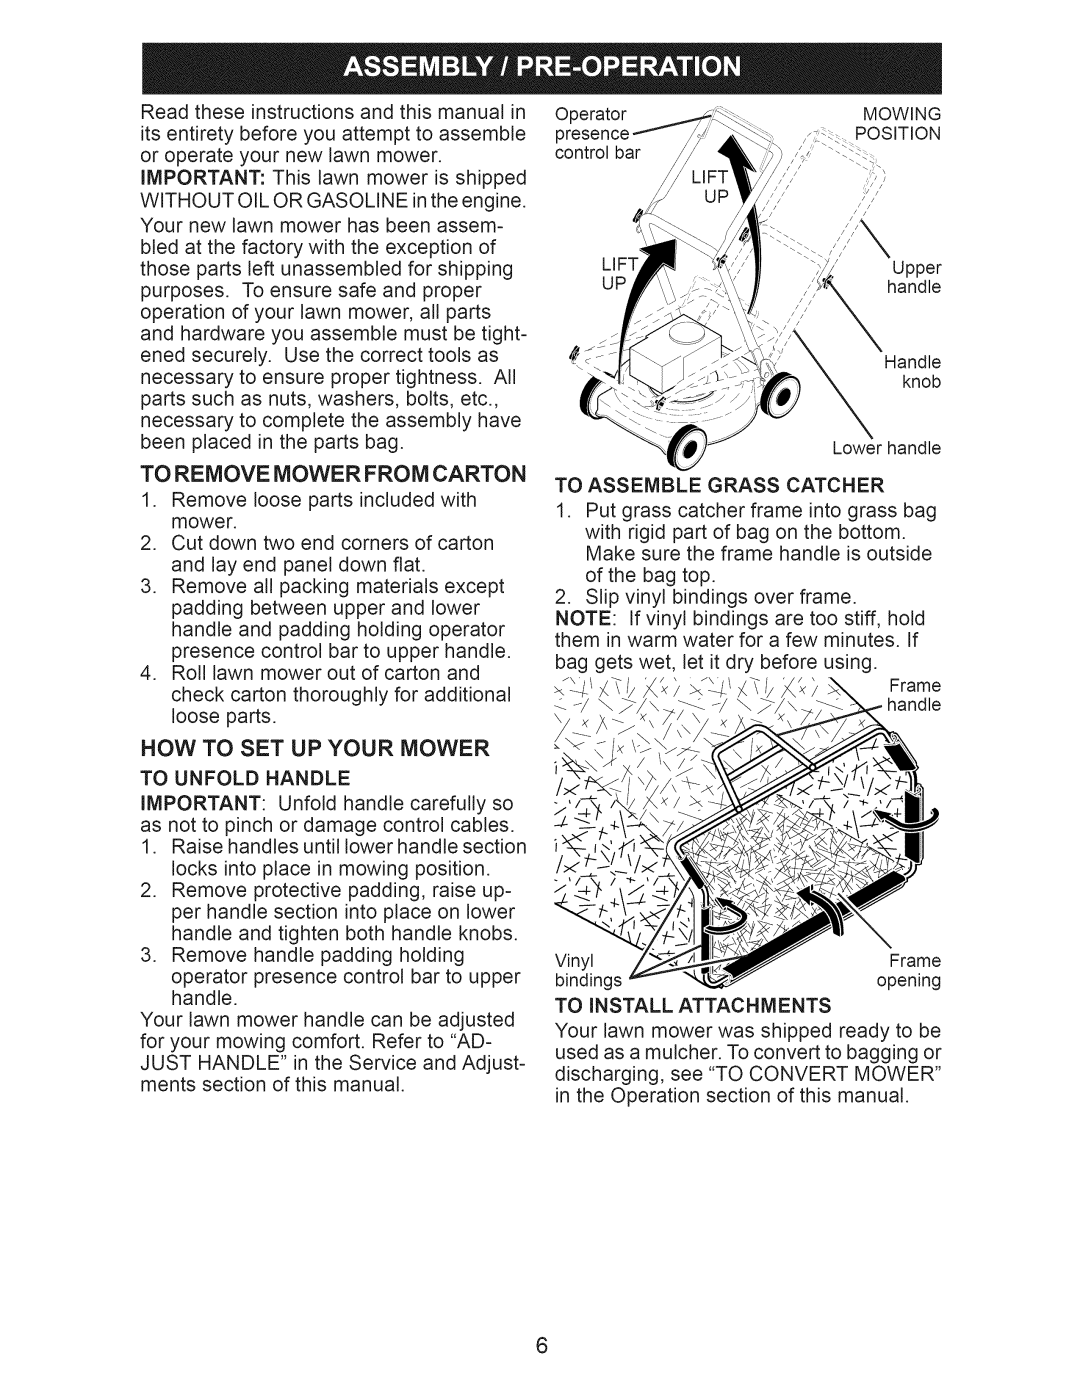 Craftsman 917.389050 owner manual Now To Set Up Your Mower, To Remove Mower From Carton 